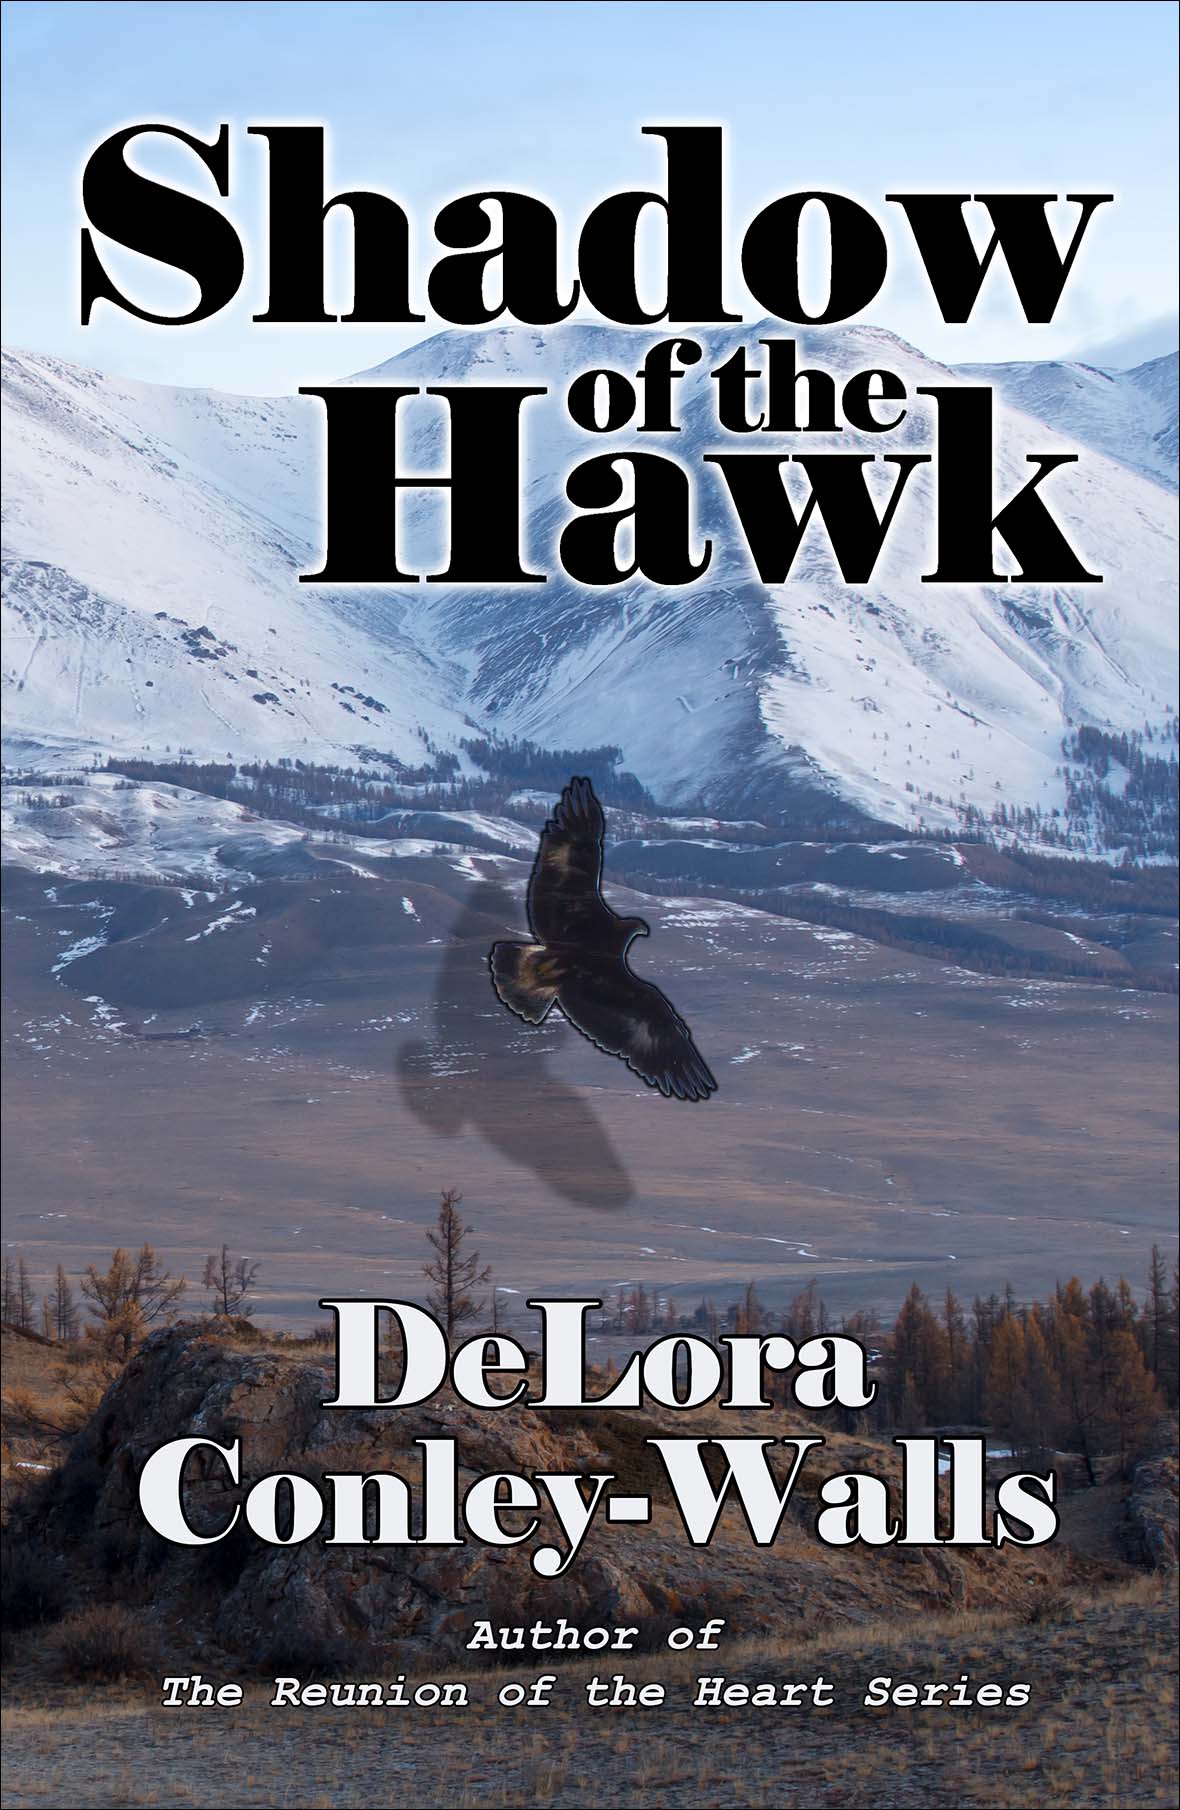 Shadow of the Hawk Cover front v13 for web insertion